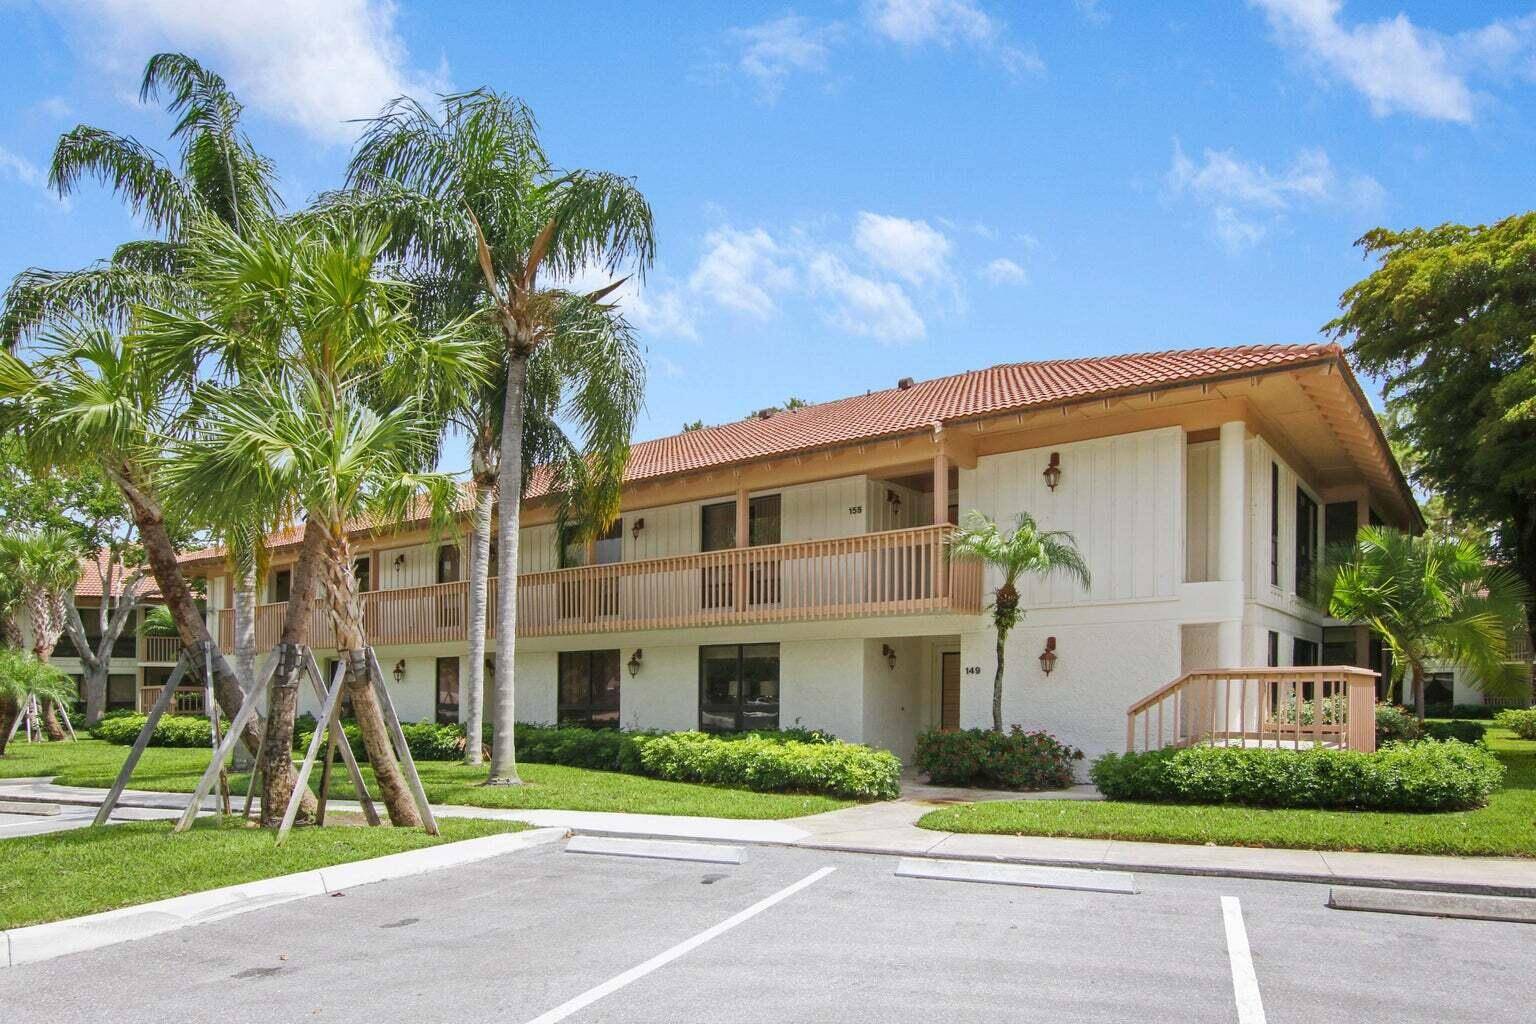 Rent this beautifully renovated, fully furnished, 2 bedroom 2 bathroom condo at PGA National Resort in Palm Beach Gardens, FL !